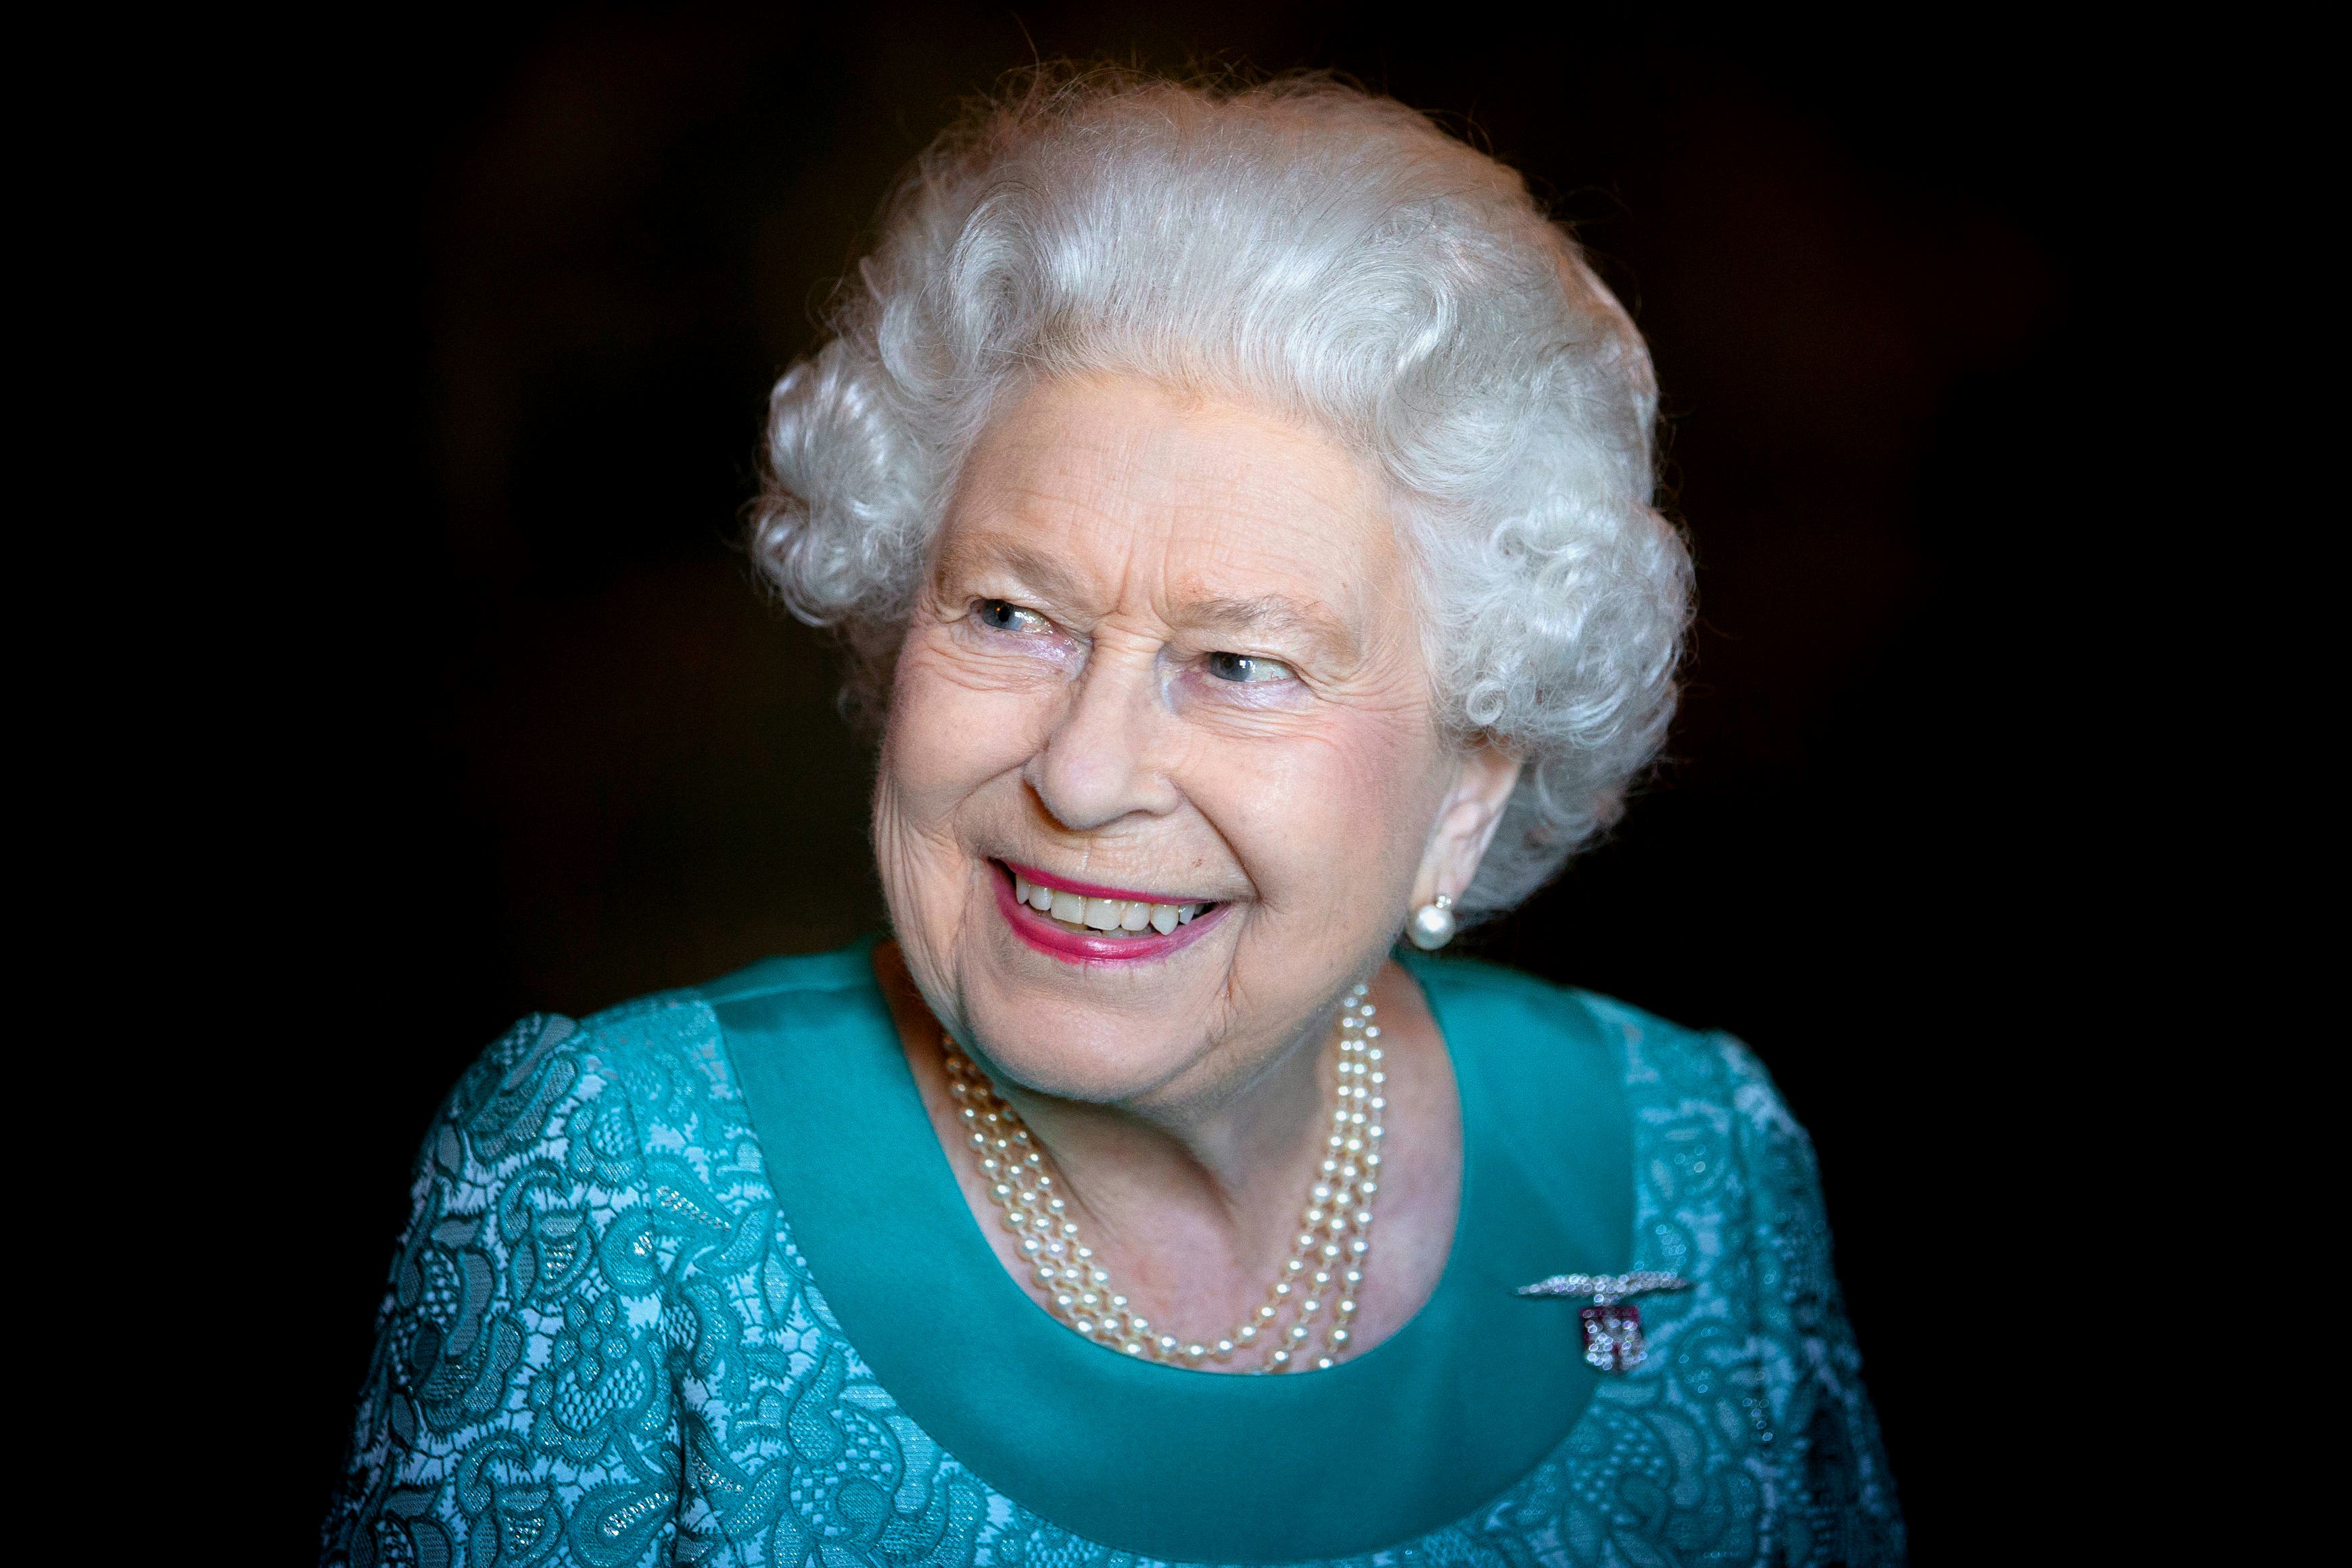 The Queen died last year at Balmoral